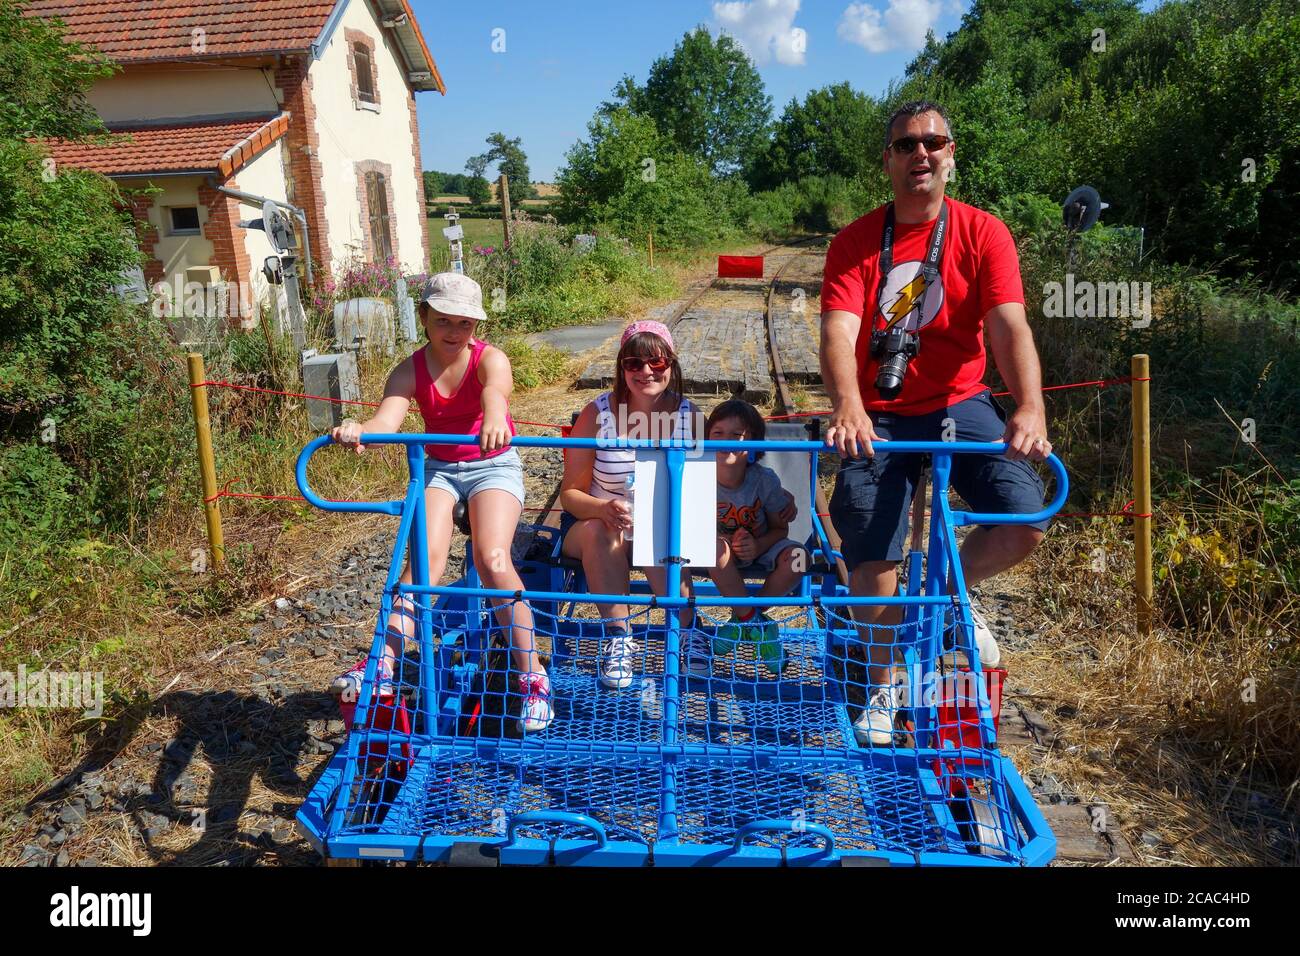 A British family enjoying a day out on a velorail system in France Stock Photo